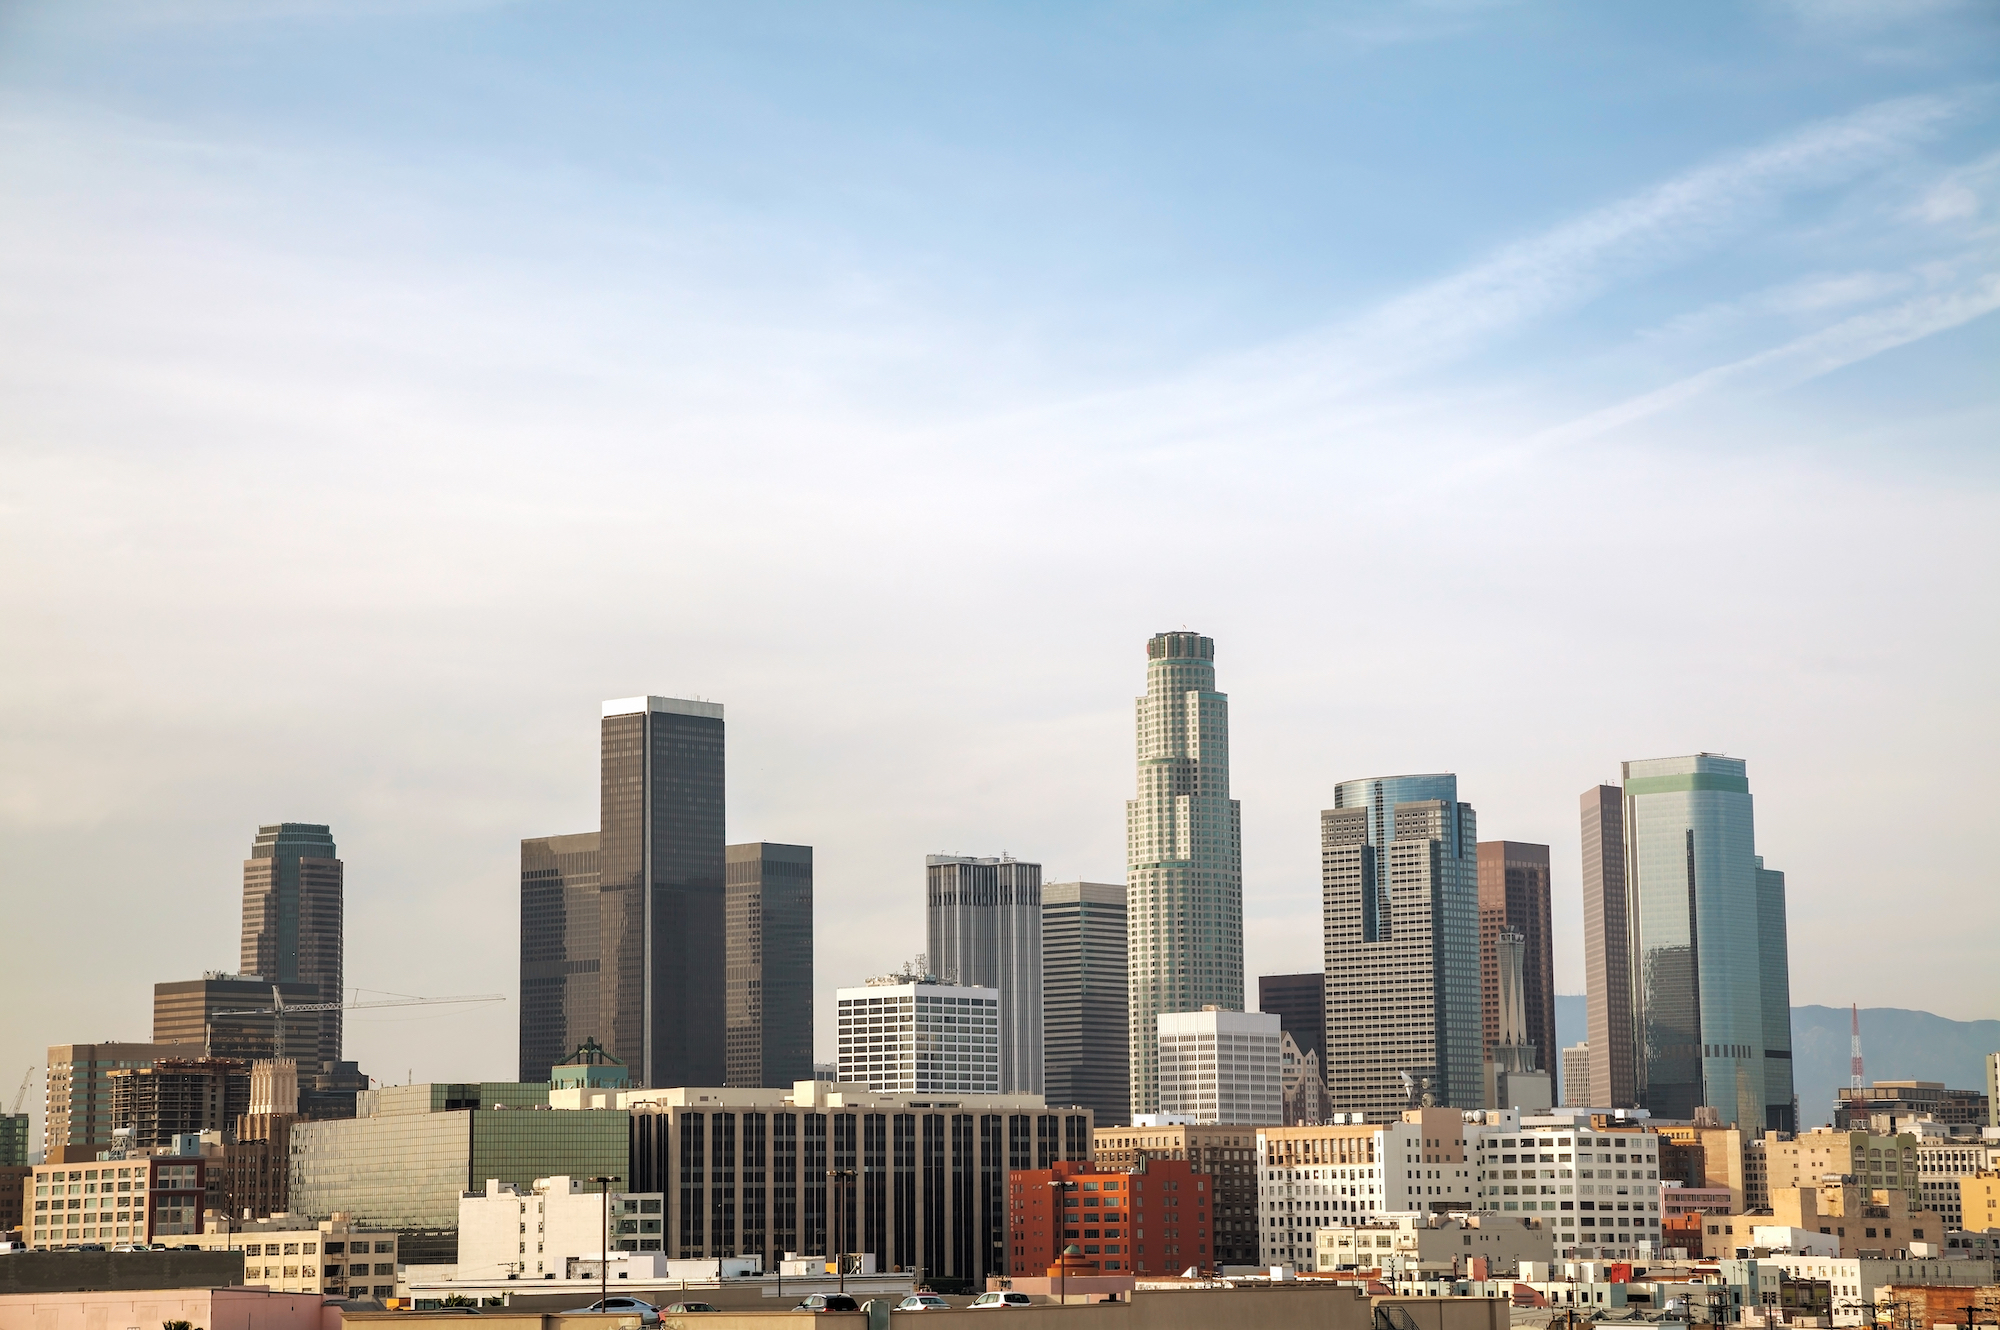 LA's skyline is pictured during the day.